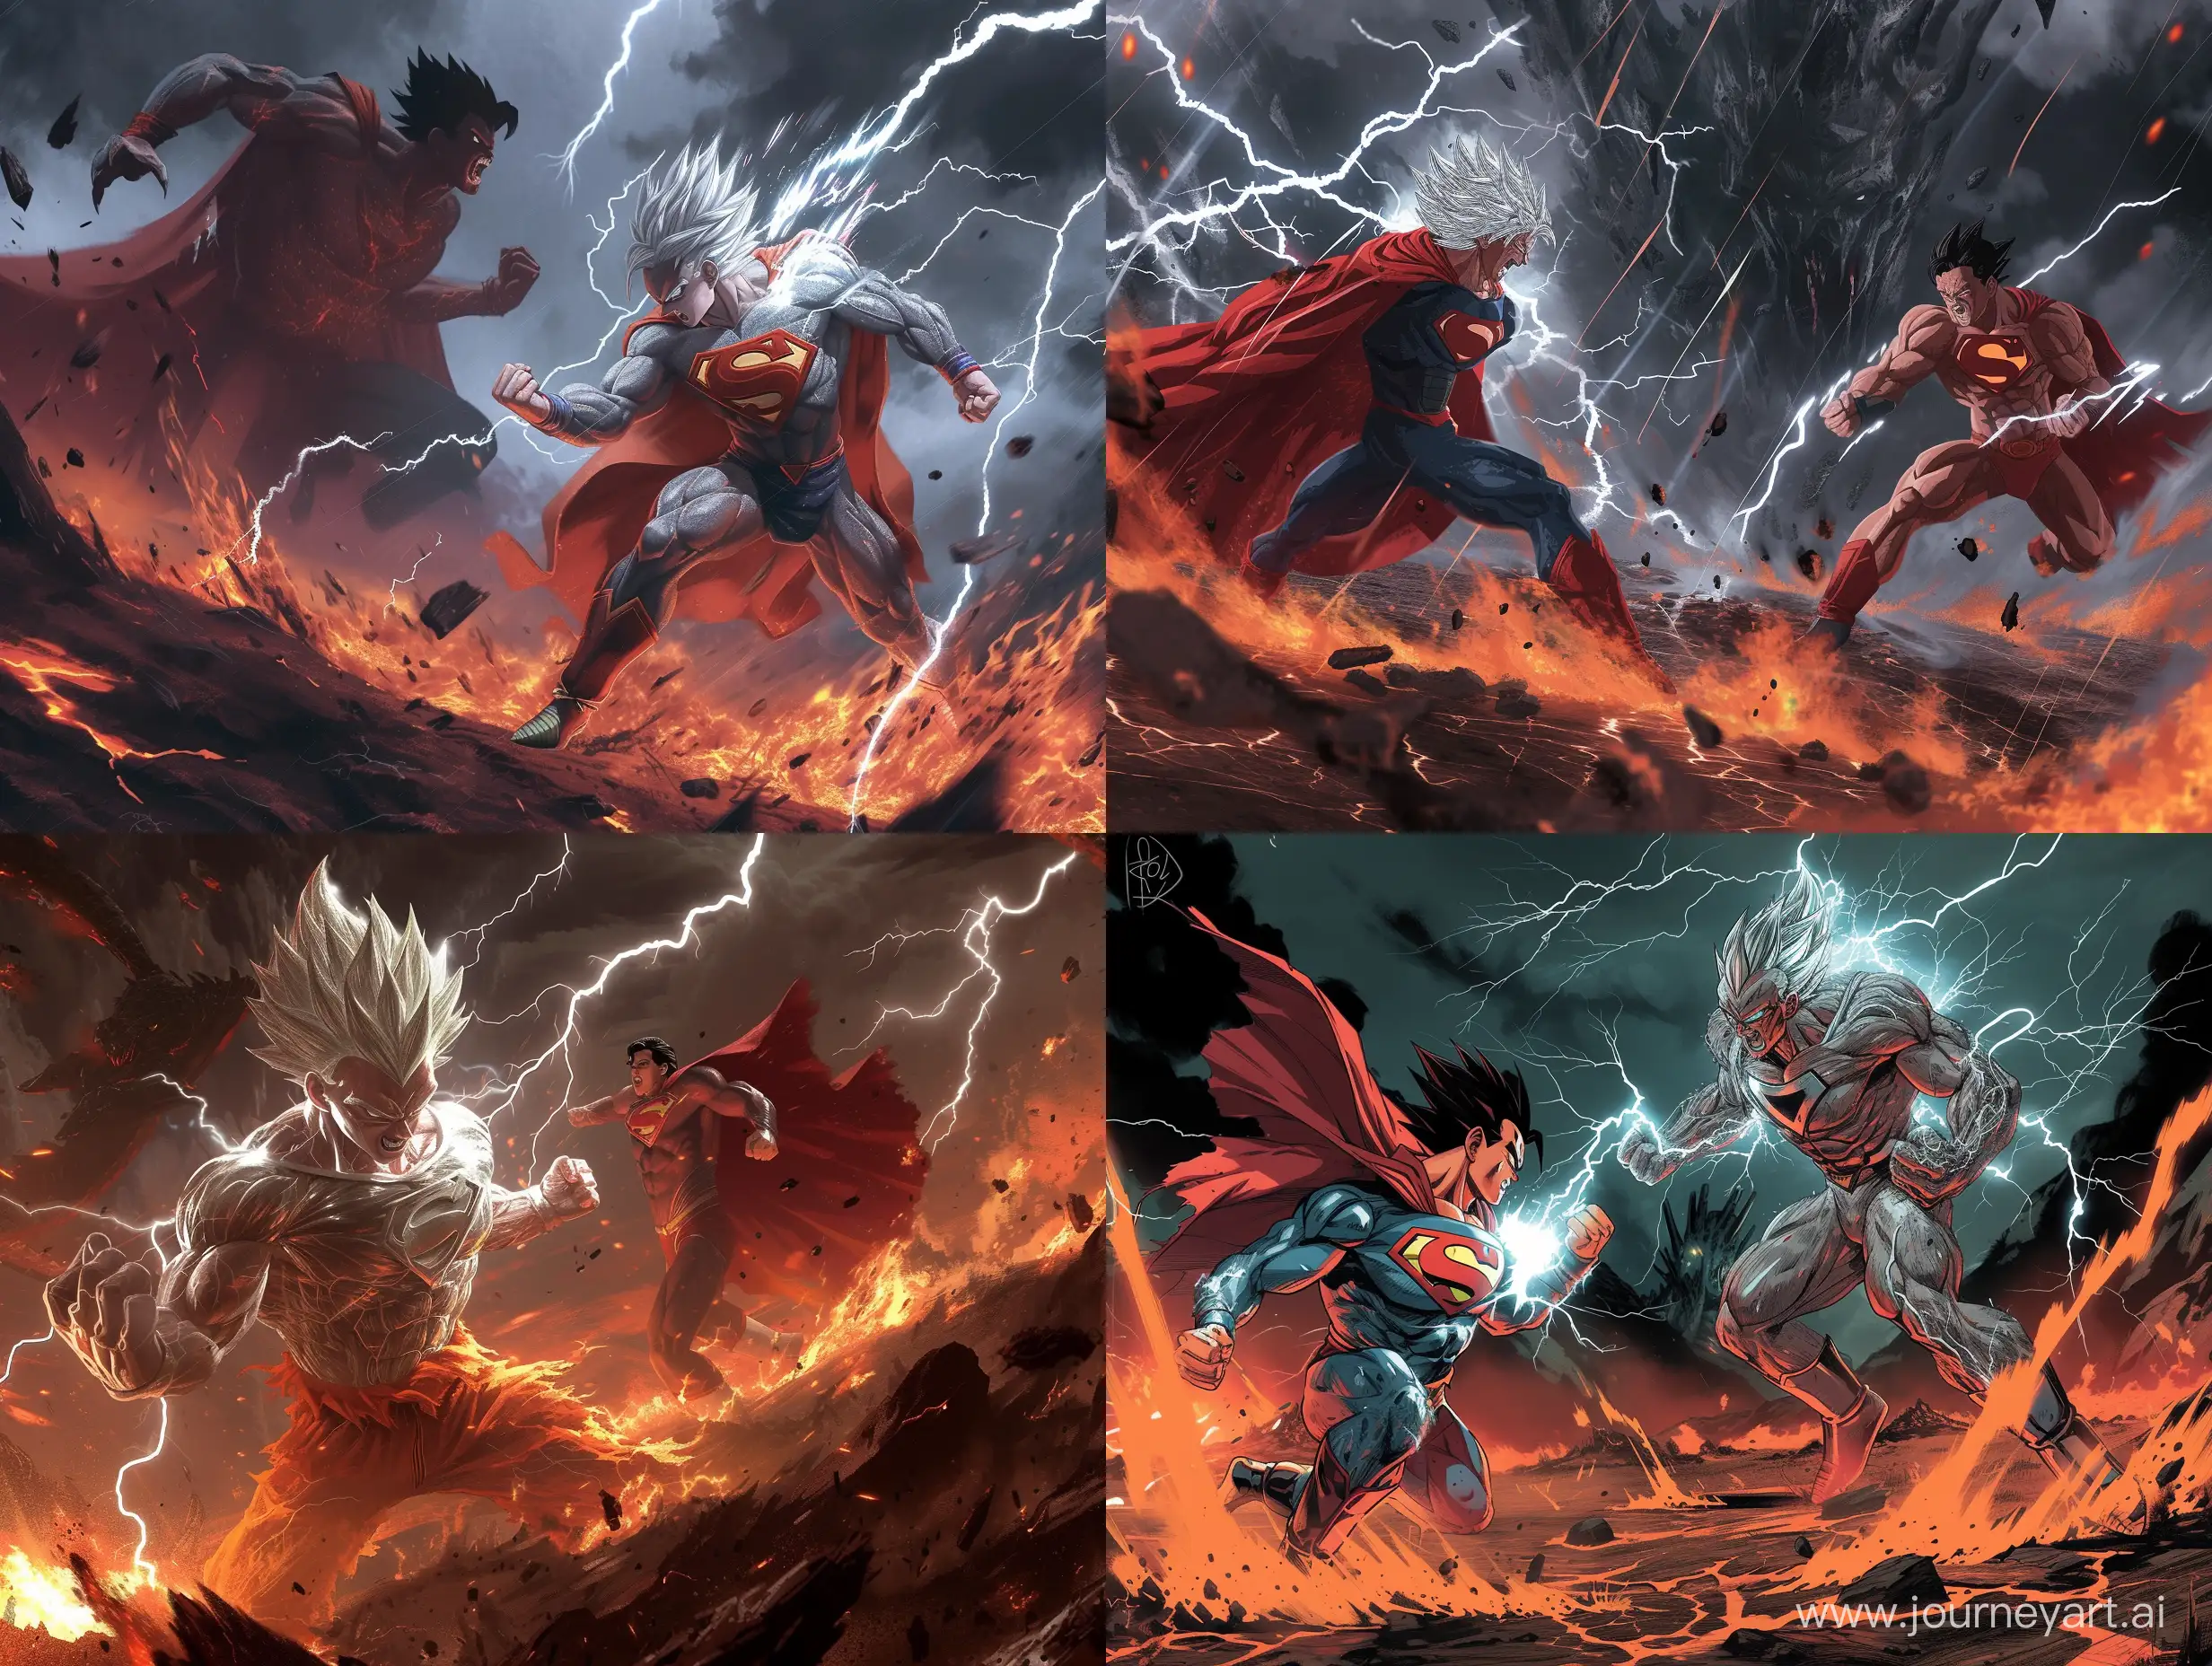 Illustrate a dynamic scene featuring Ultra Instinct Goku engaged in a fierce battle against Superman. Goku, radiating with an intense silver aura, demonstrates extraordinary agility and power as he clashes with Superman. Superman, enveloped in a crimson red aura, exhibits formidable strength and determination.The battlefield is set against a dark and ominous background, reminiscent of the style seen in Dragon Ball Super. Shenron, the Eternal Dragon, looms large in the background, its presence adding an air of mystique and grandeur to the scene. Lightning flashes illuminate the sky, casting dramatic shadows across the landscape. Lava erupts from the ground, adding to the chaotic atmosphere of the battle.The illustration should capture the essence of the clash between two iconic characters, blending the dynamic action of Dragon Ball Super with the epic scale of the confrontation. The style should reflect the signature artwork of Akira Toriyama, capturing the energy and intensity of the battle in vivid detail.